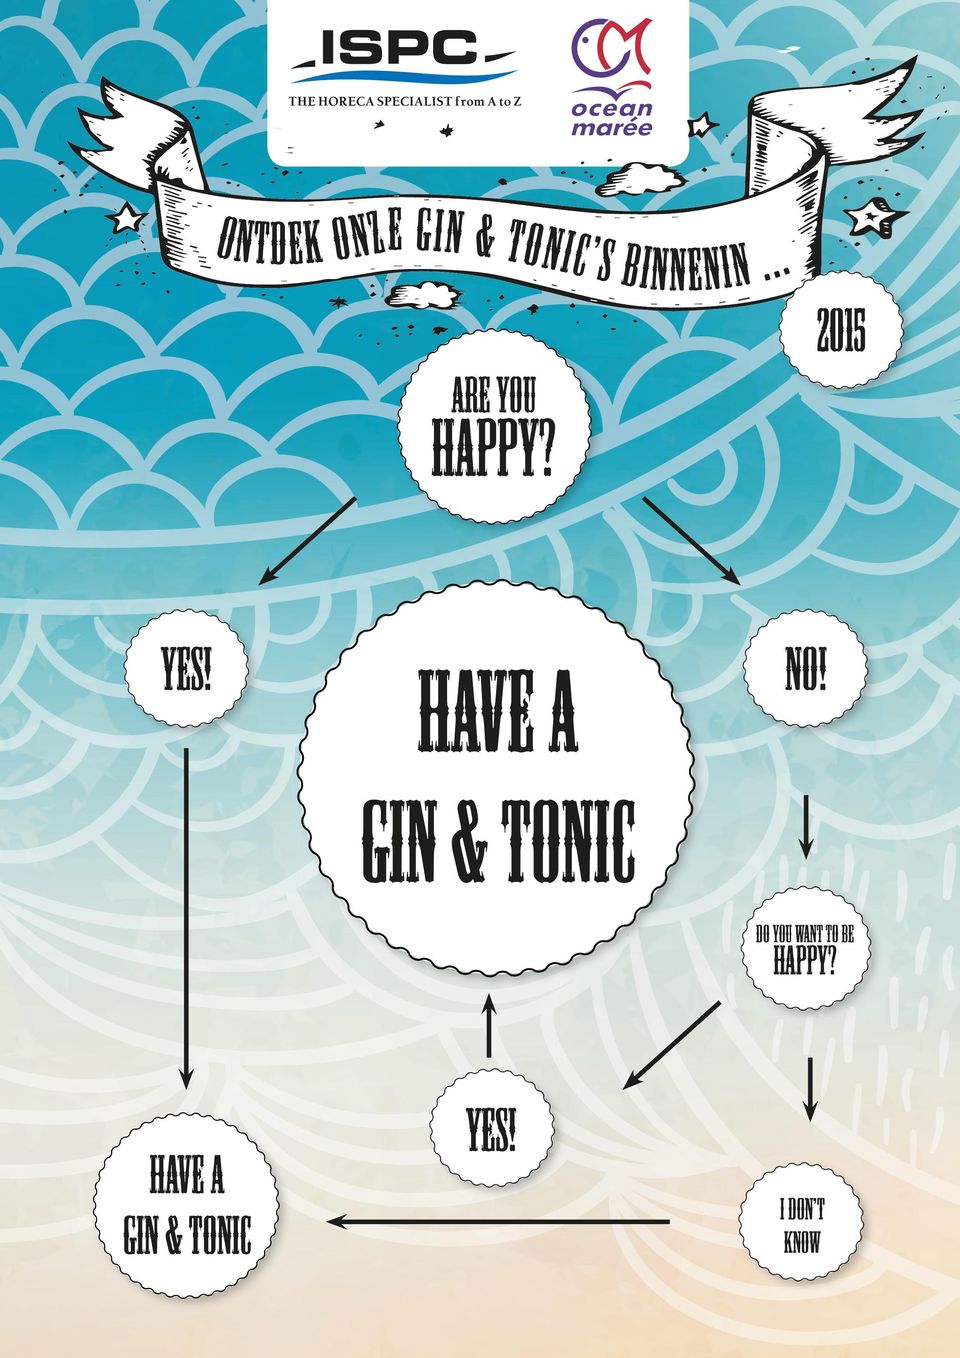 HAVE A GIN & TONIC NO!